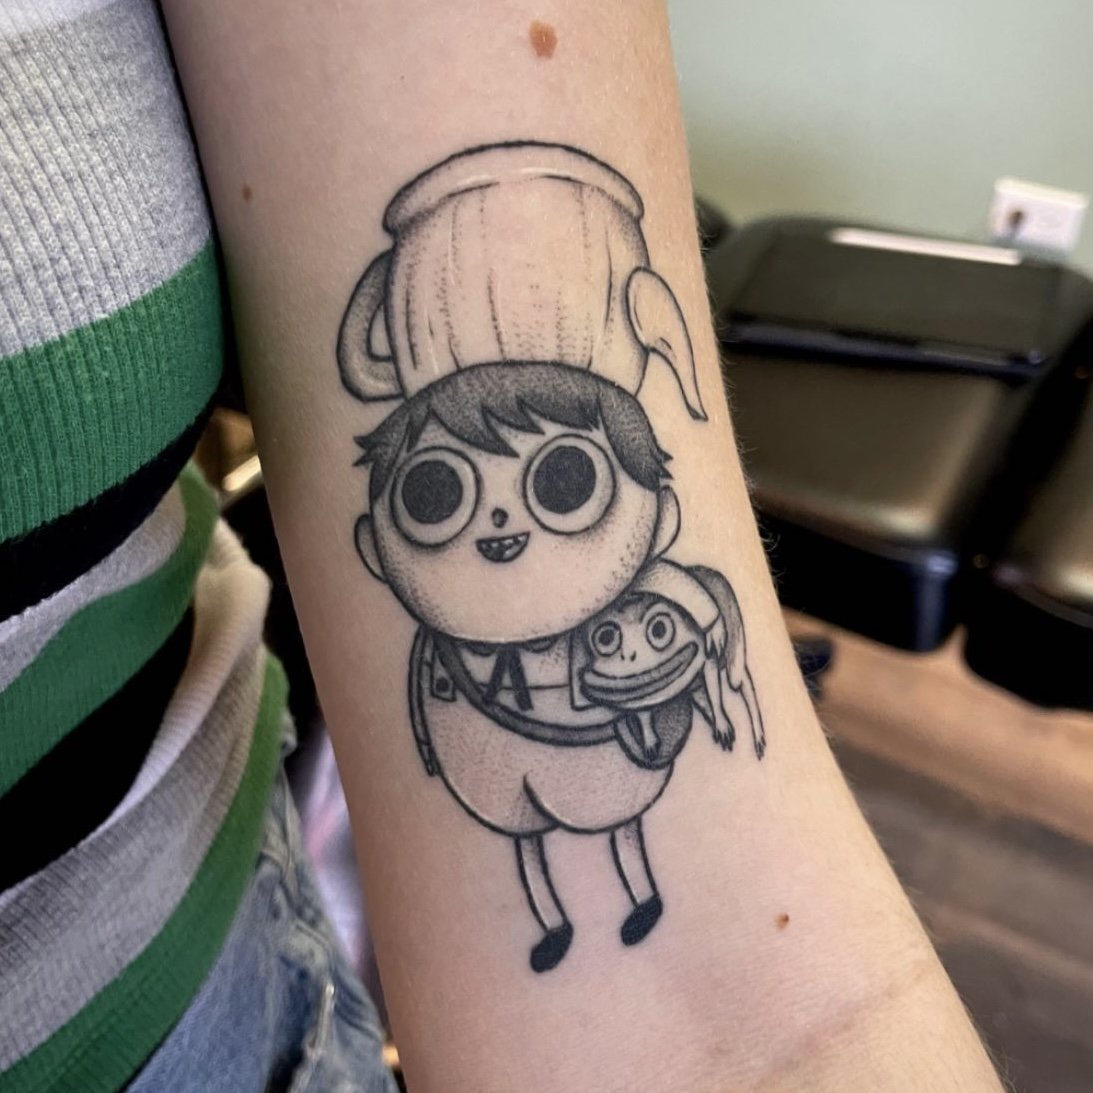 Discover more than 59 over the garden wall tattoos super hot - in.cdgdbentre